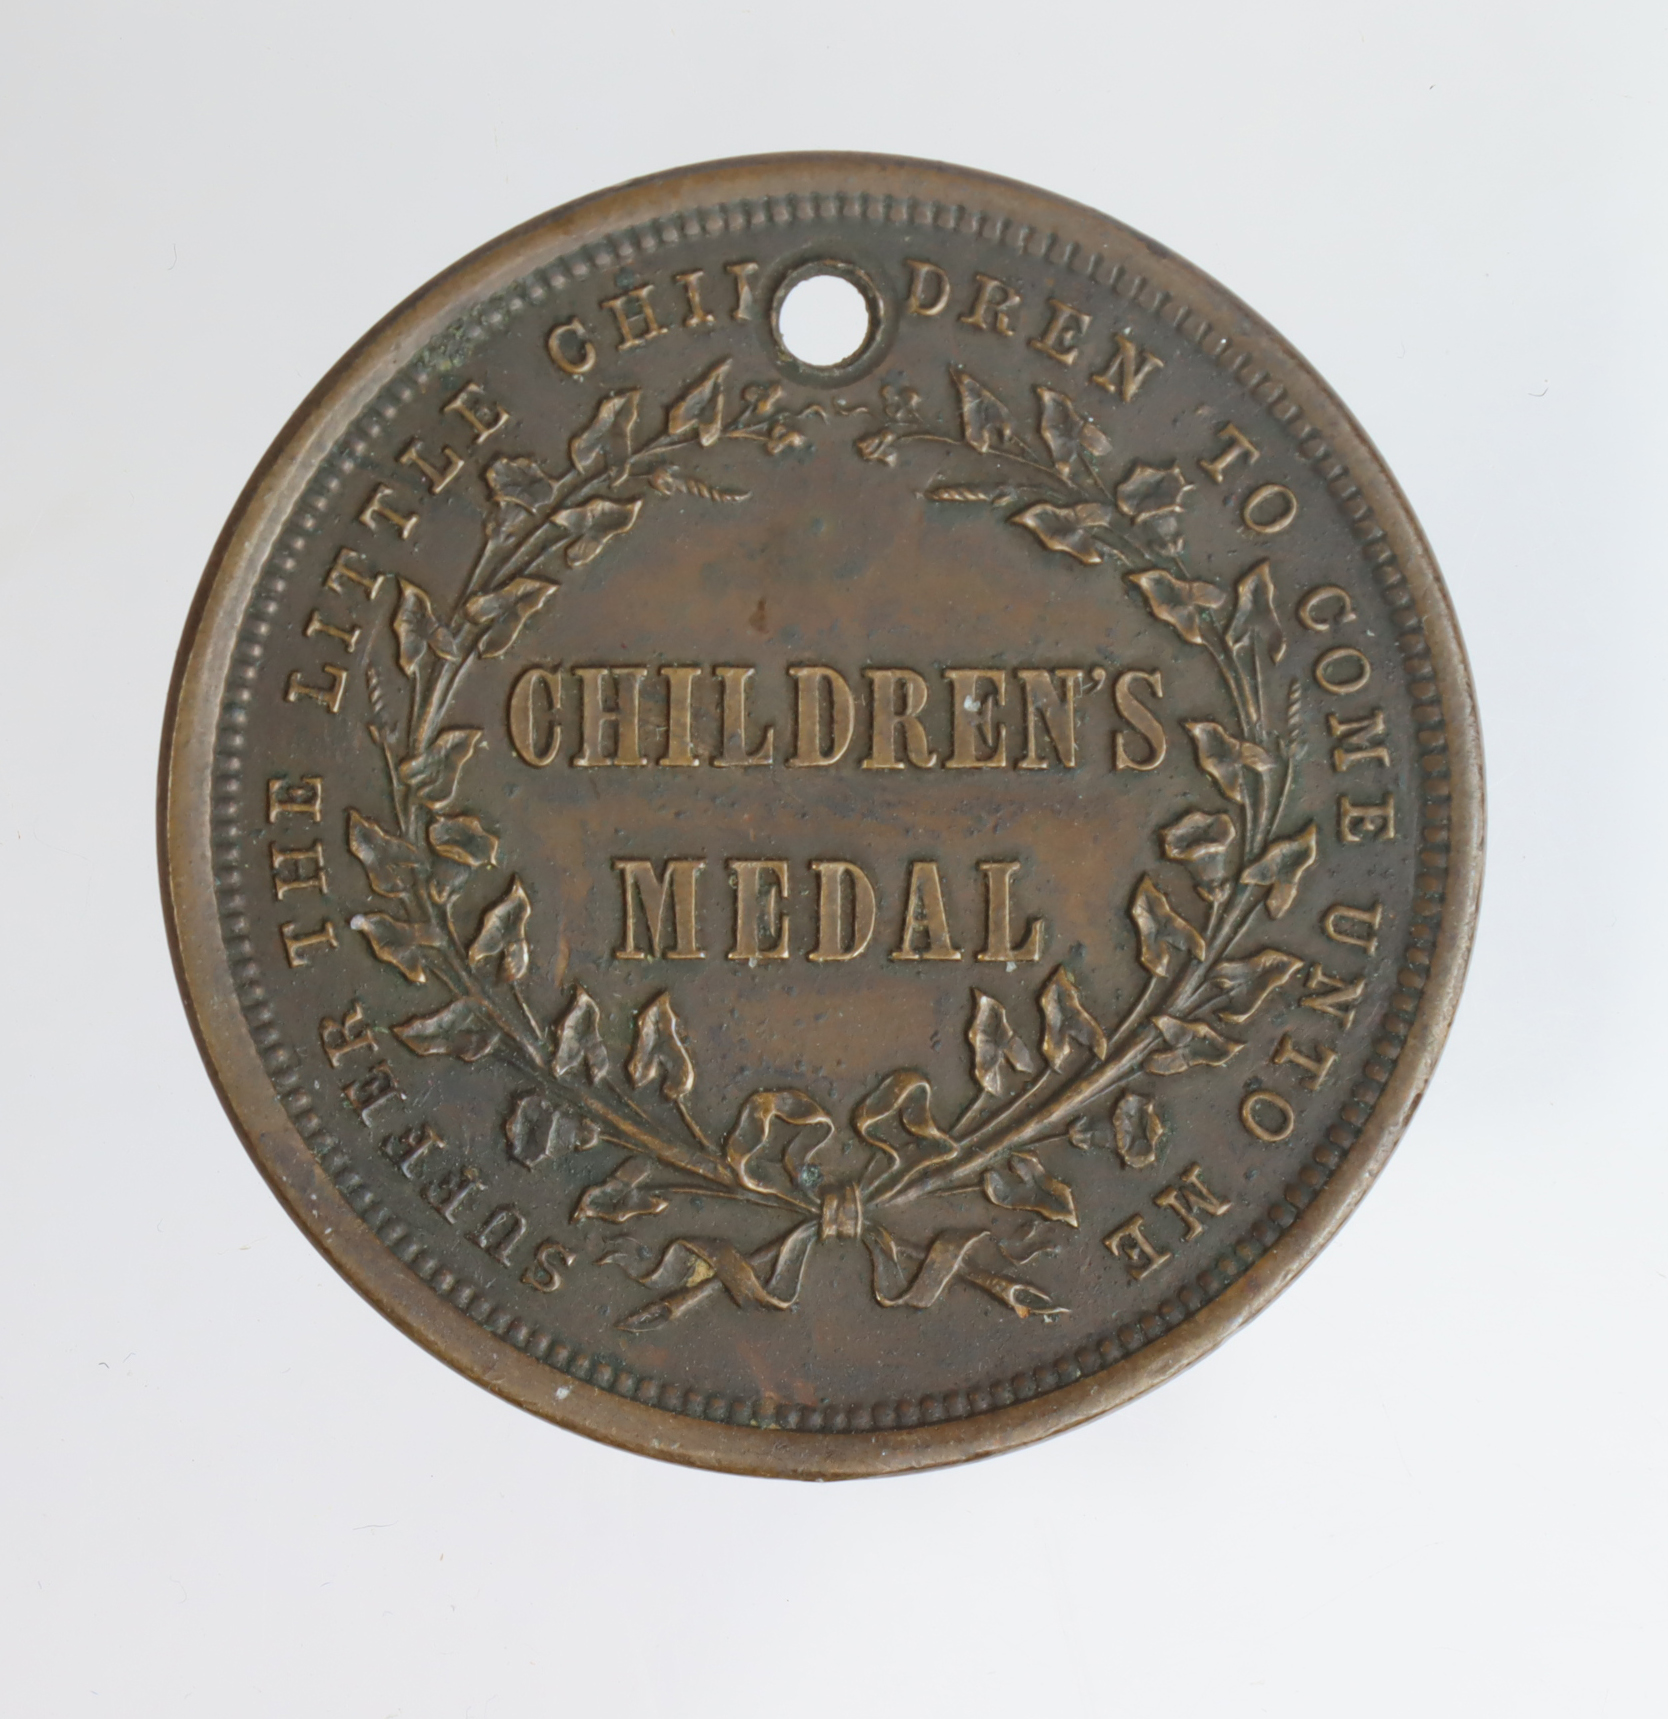 USA, Centenary of Amercian Methodism, Francis Ashbury 1866 / Childrens Medal. Copper d.30mm. NEF, - Image 2 of 2